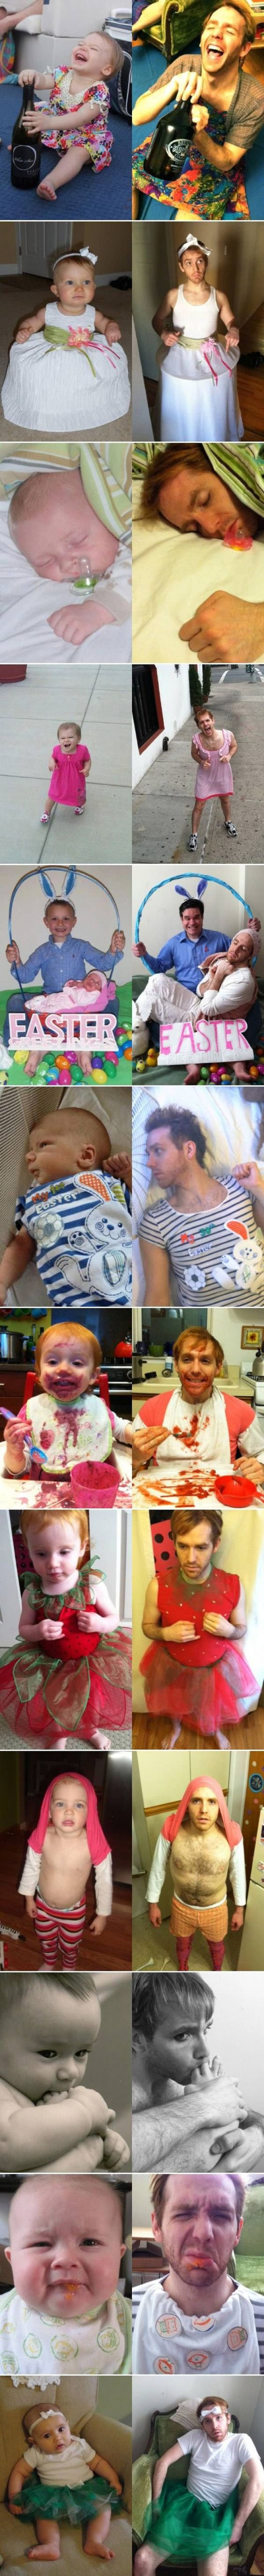 One Man's Journey Recreating His Girlfriend's Baby Photos